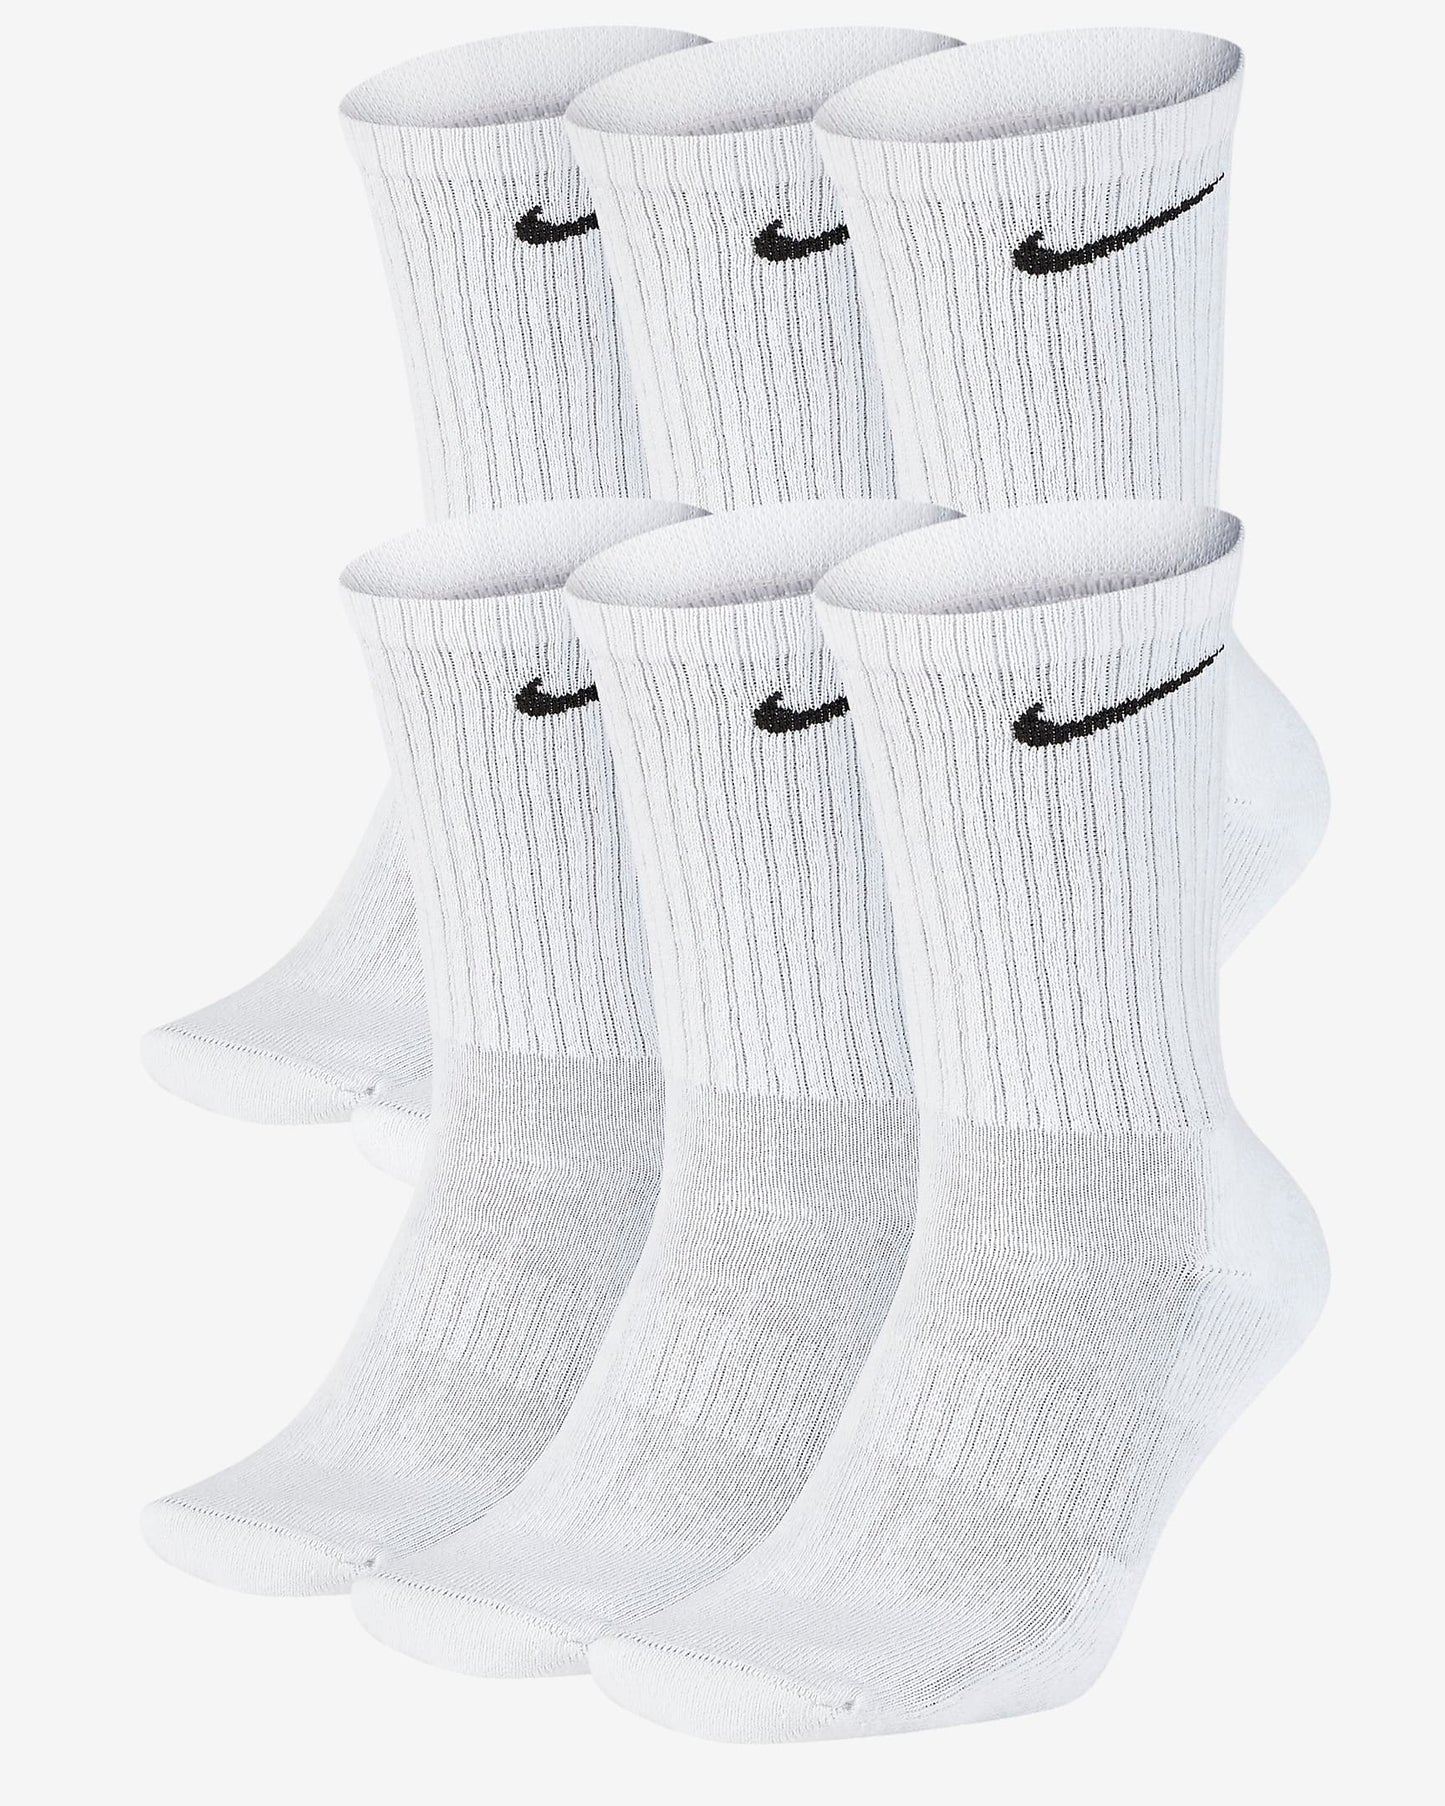 Nike White Everyday Lightweight Cotton Cushioned Crew Socks 6 Pack - Genuine Design Luxury Consignment for Men. New & Pre-Owned Clothing, Shoes, & Accessories. Calgary, Canada